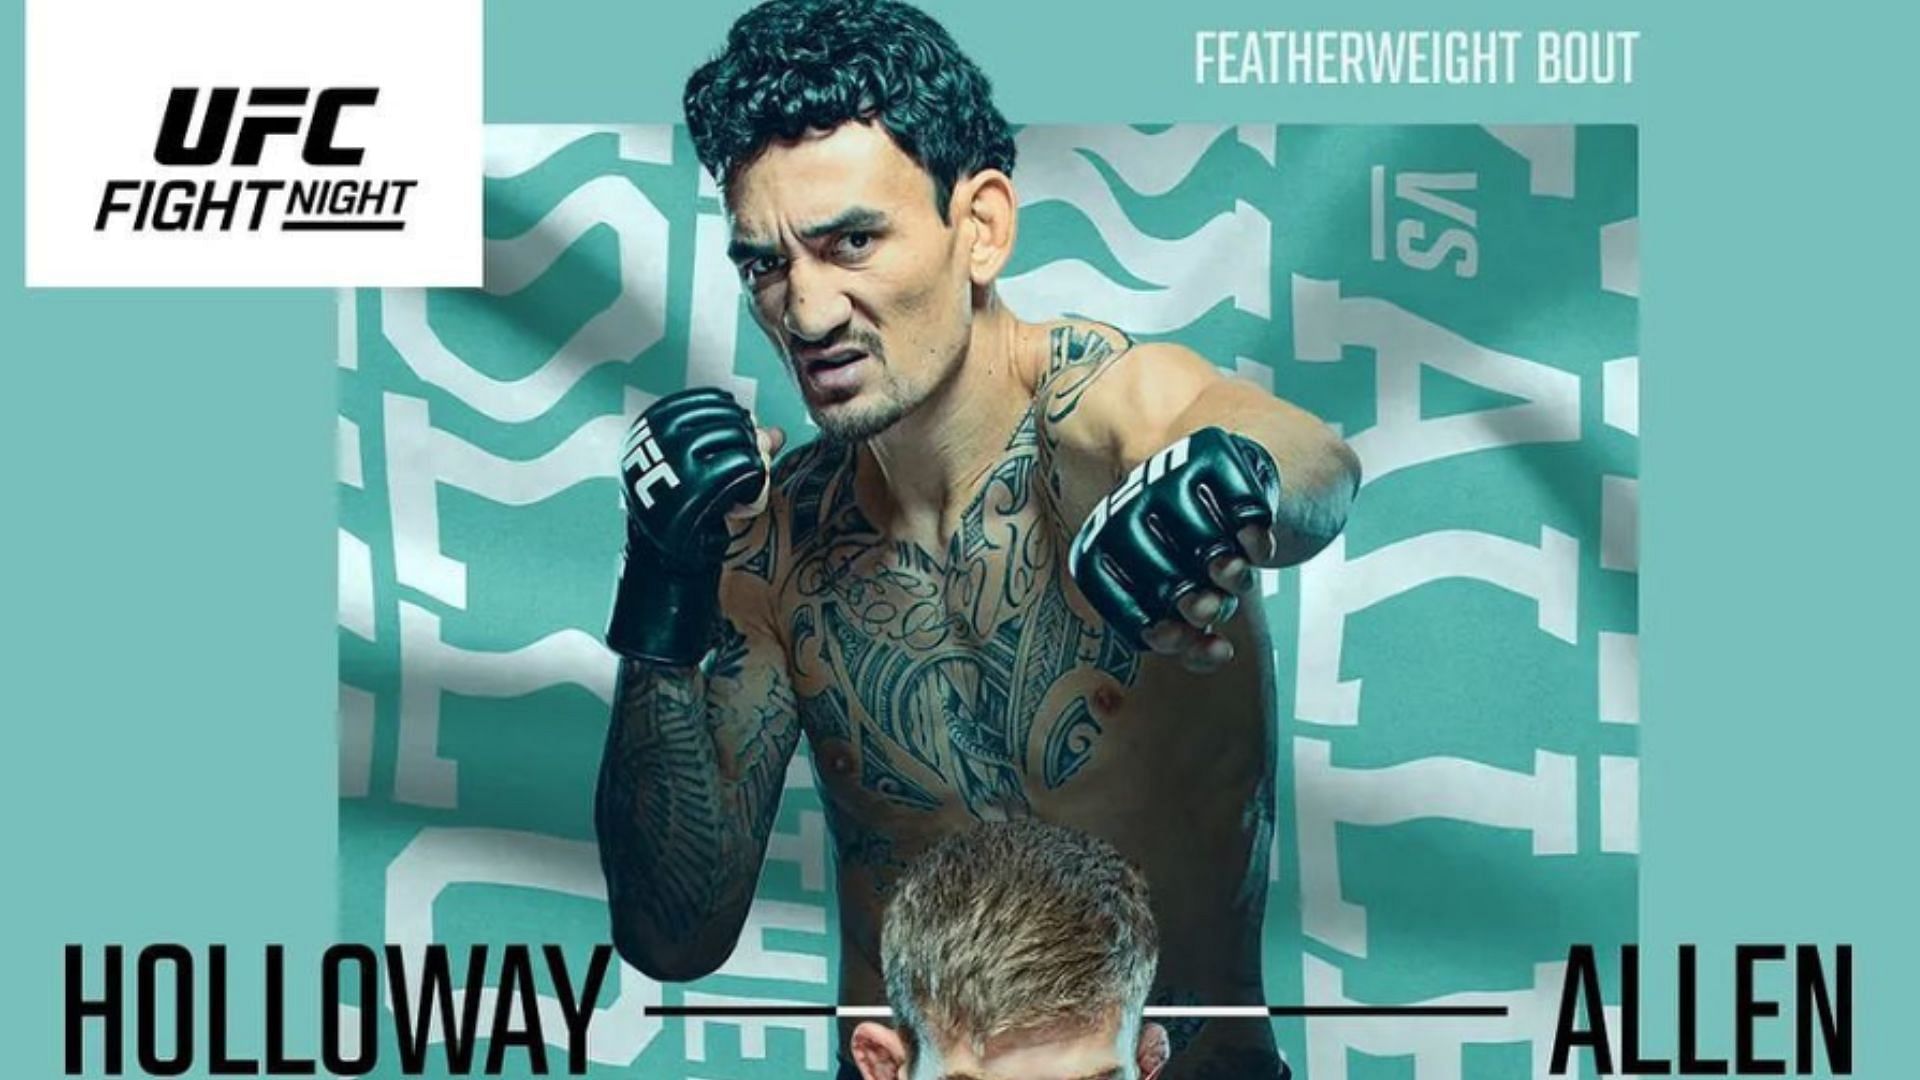 UFC Fight Night Kansas City official poster [Image courtesy of @ufc on Instagram]